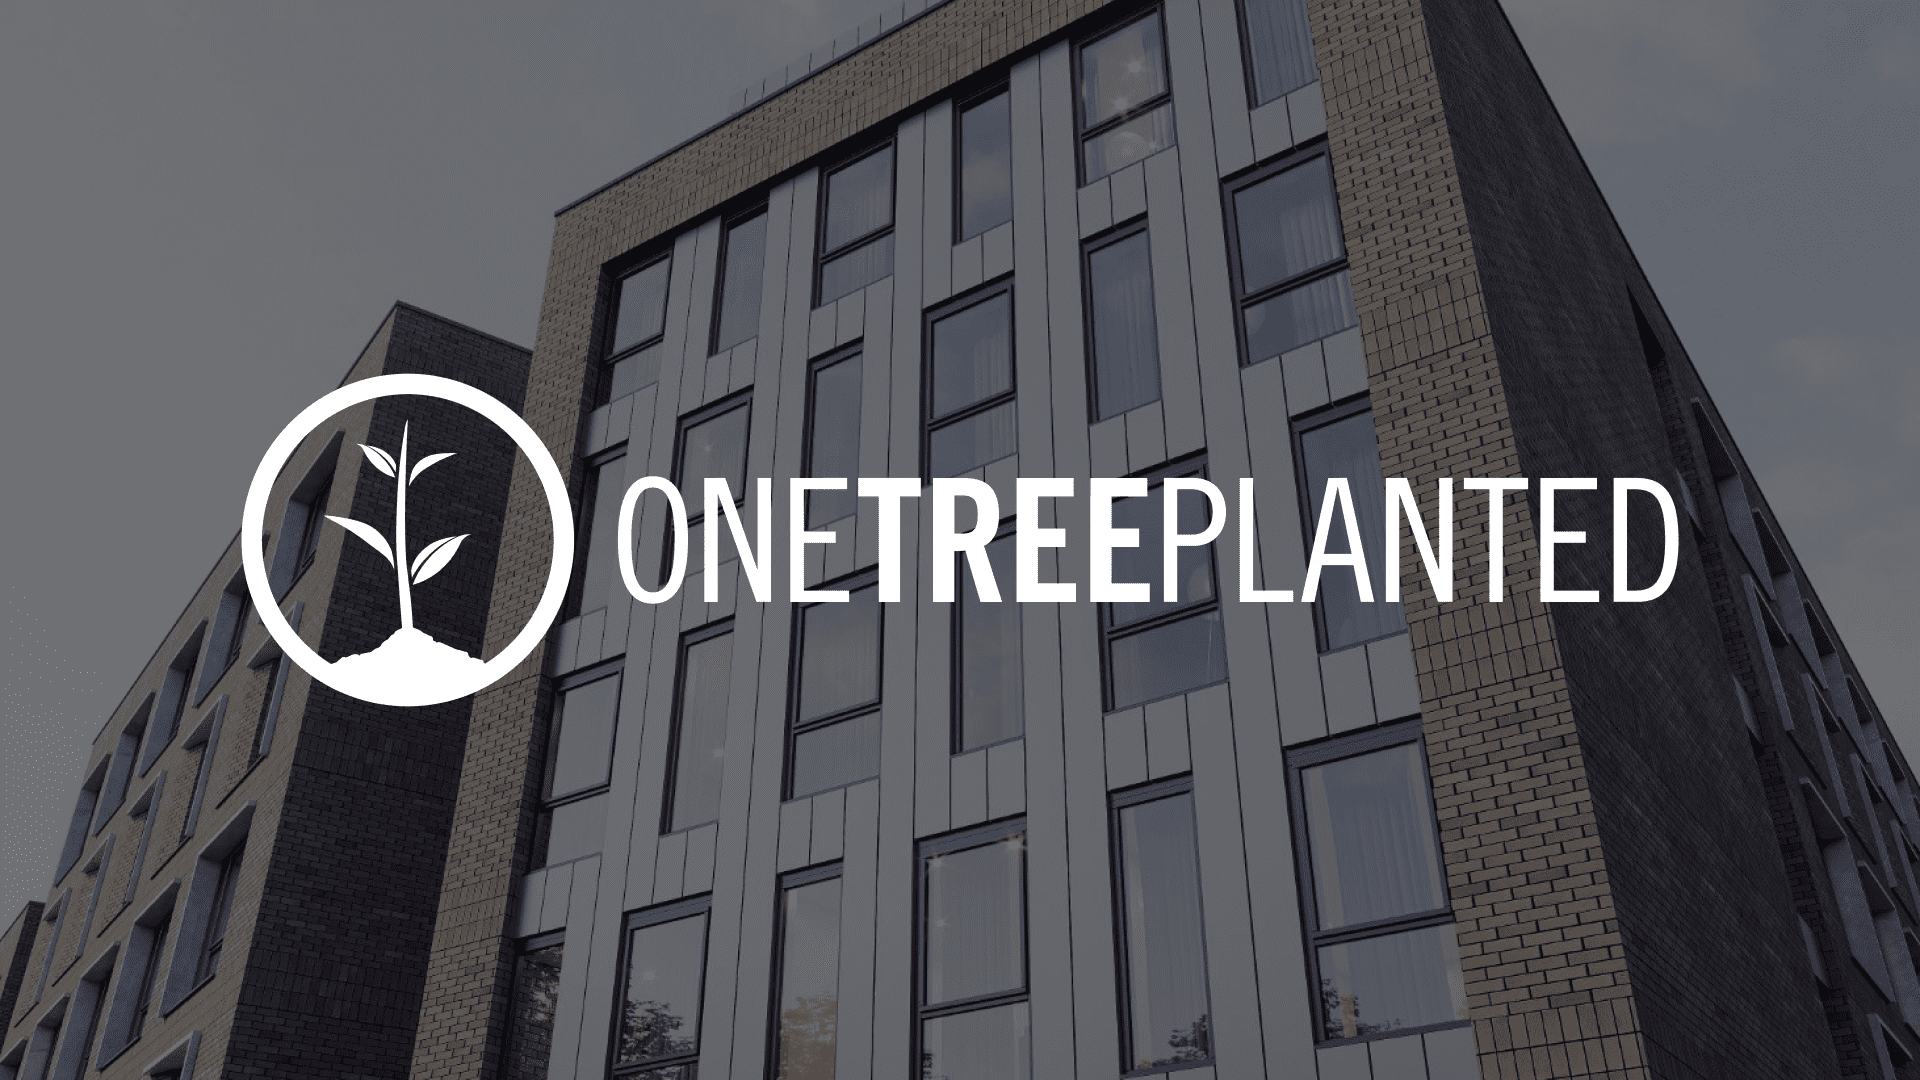 One Tree Planted brand logo with Element-The Quarter in the background.